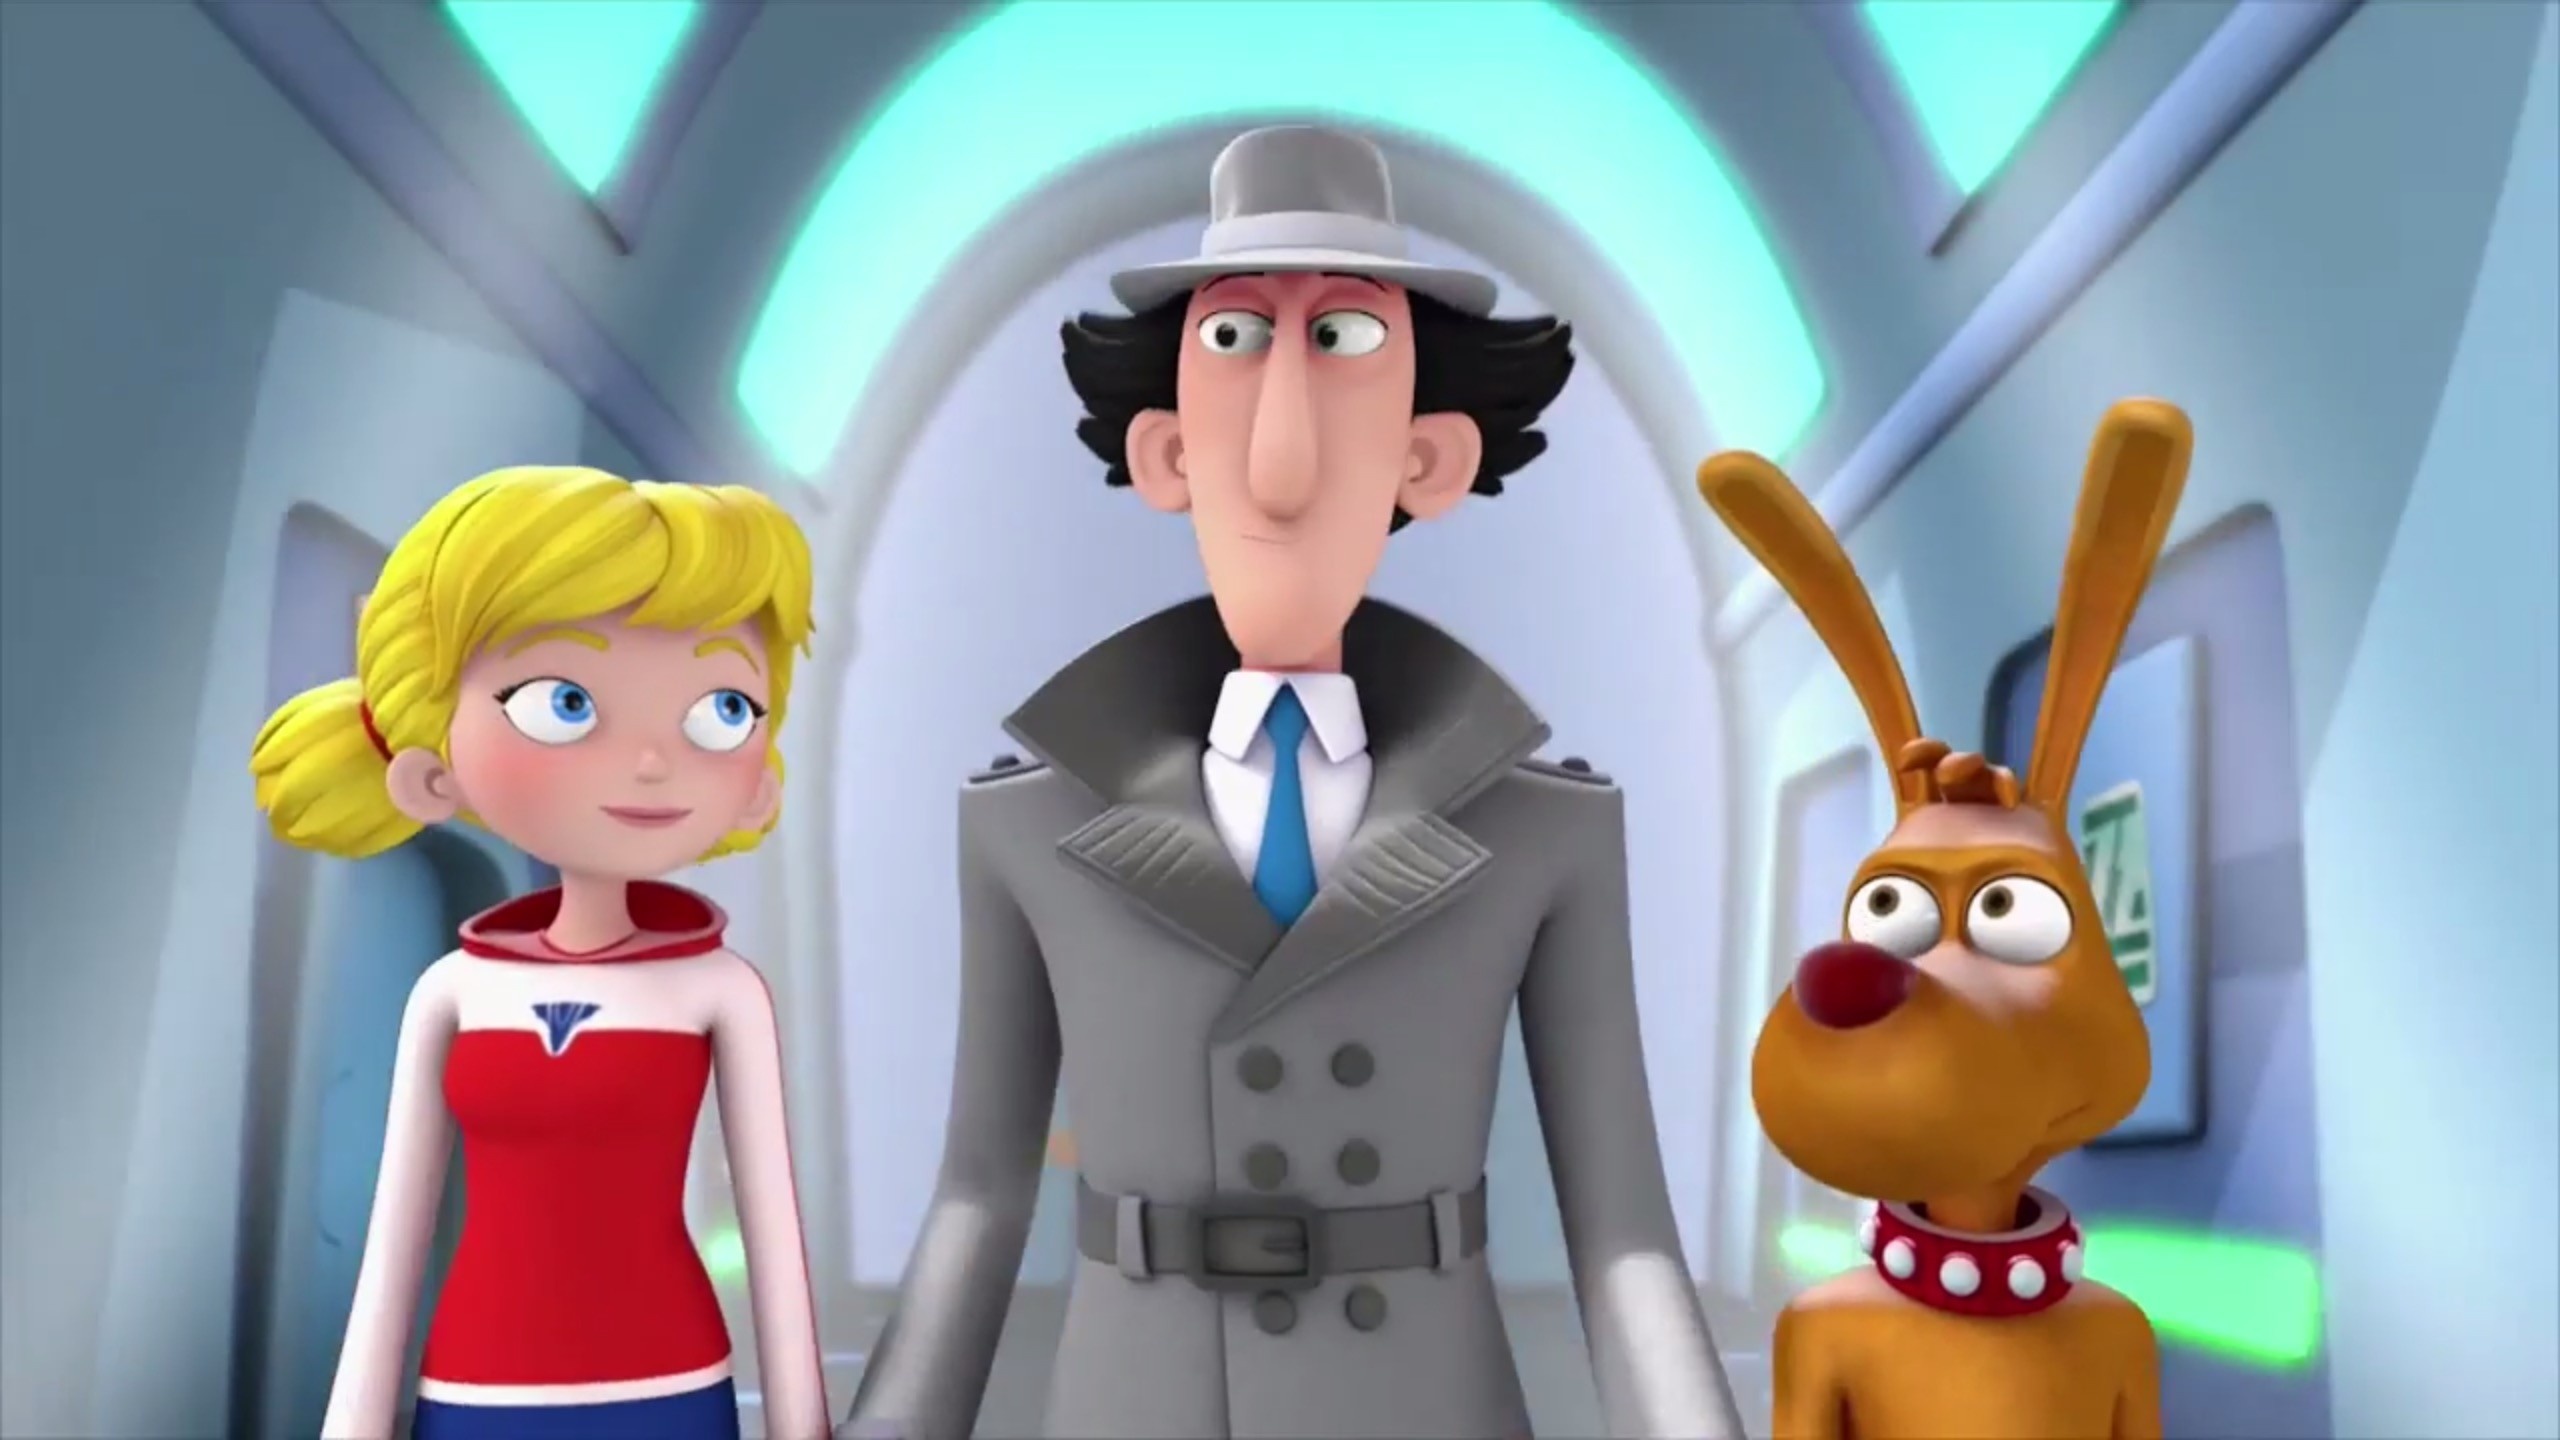 Inspector Gadget, Wallpapers, Background pictures, Animated series, 2560x1440 HD Desktop